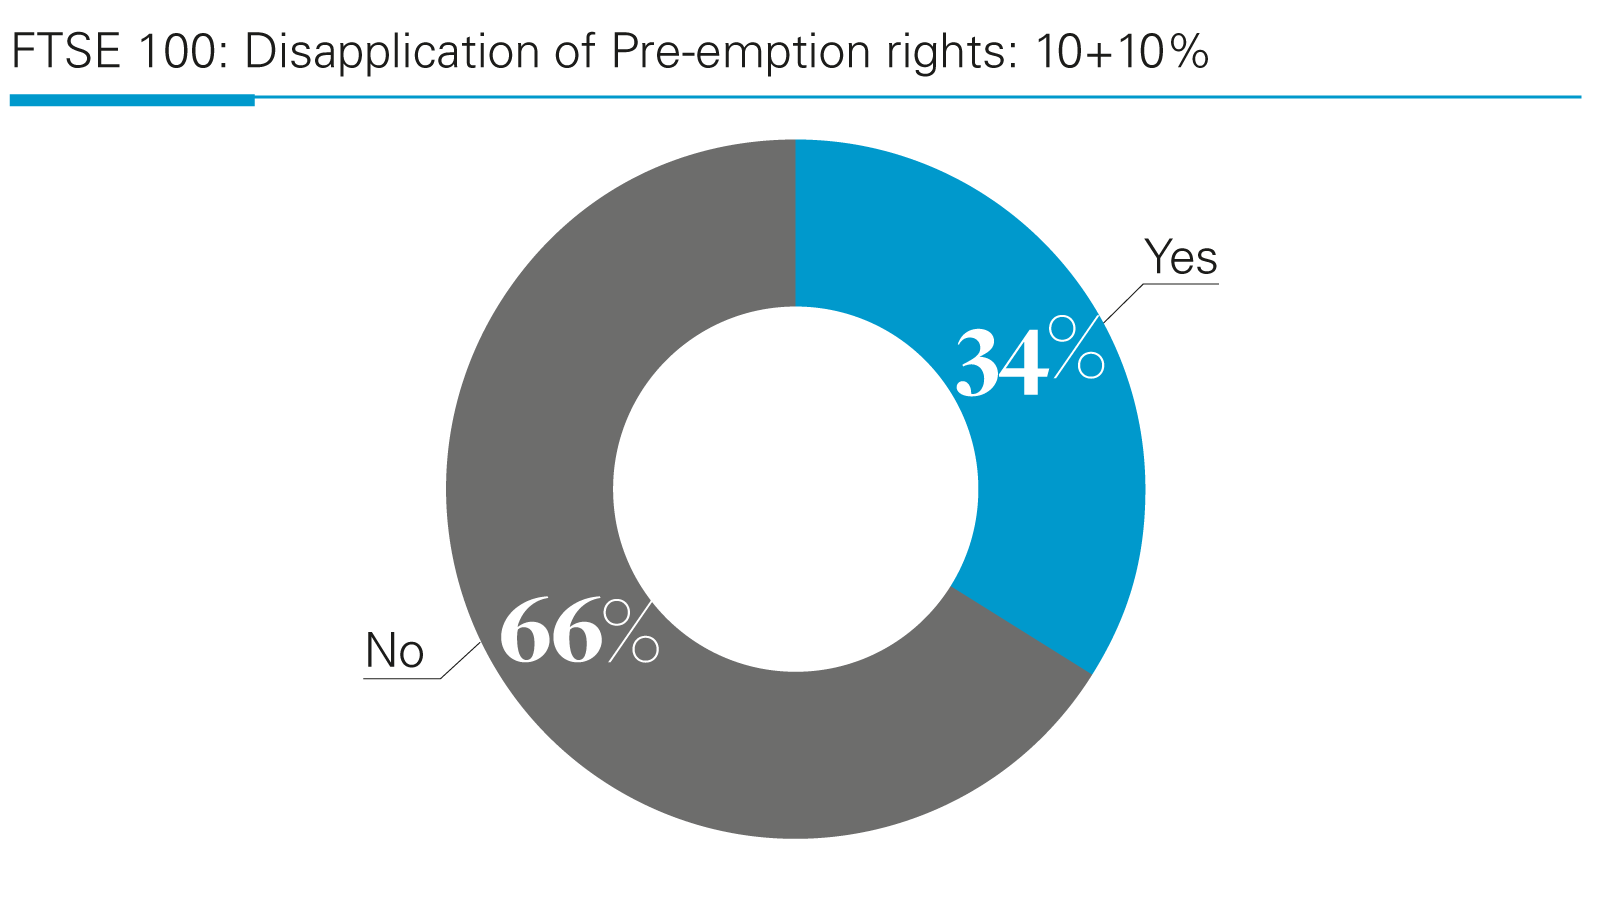 FTSE 100: Disapplication of Pre-emption rights: 10+10% 